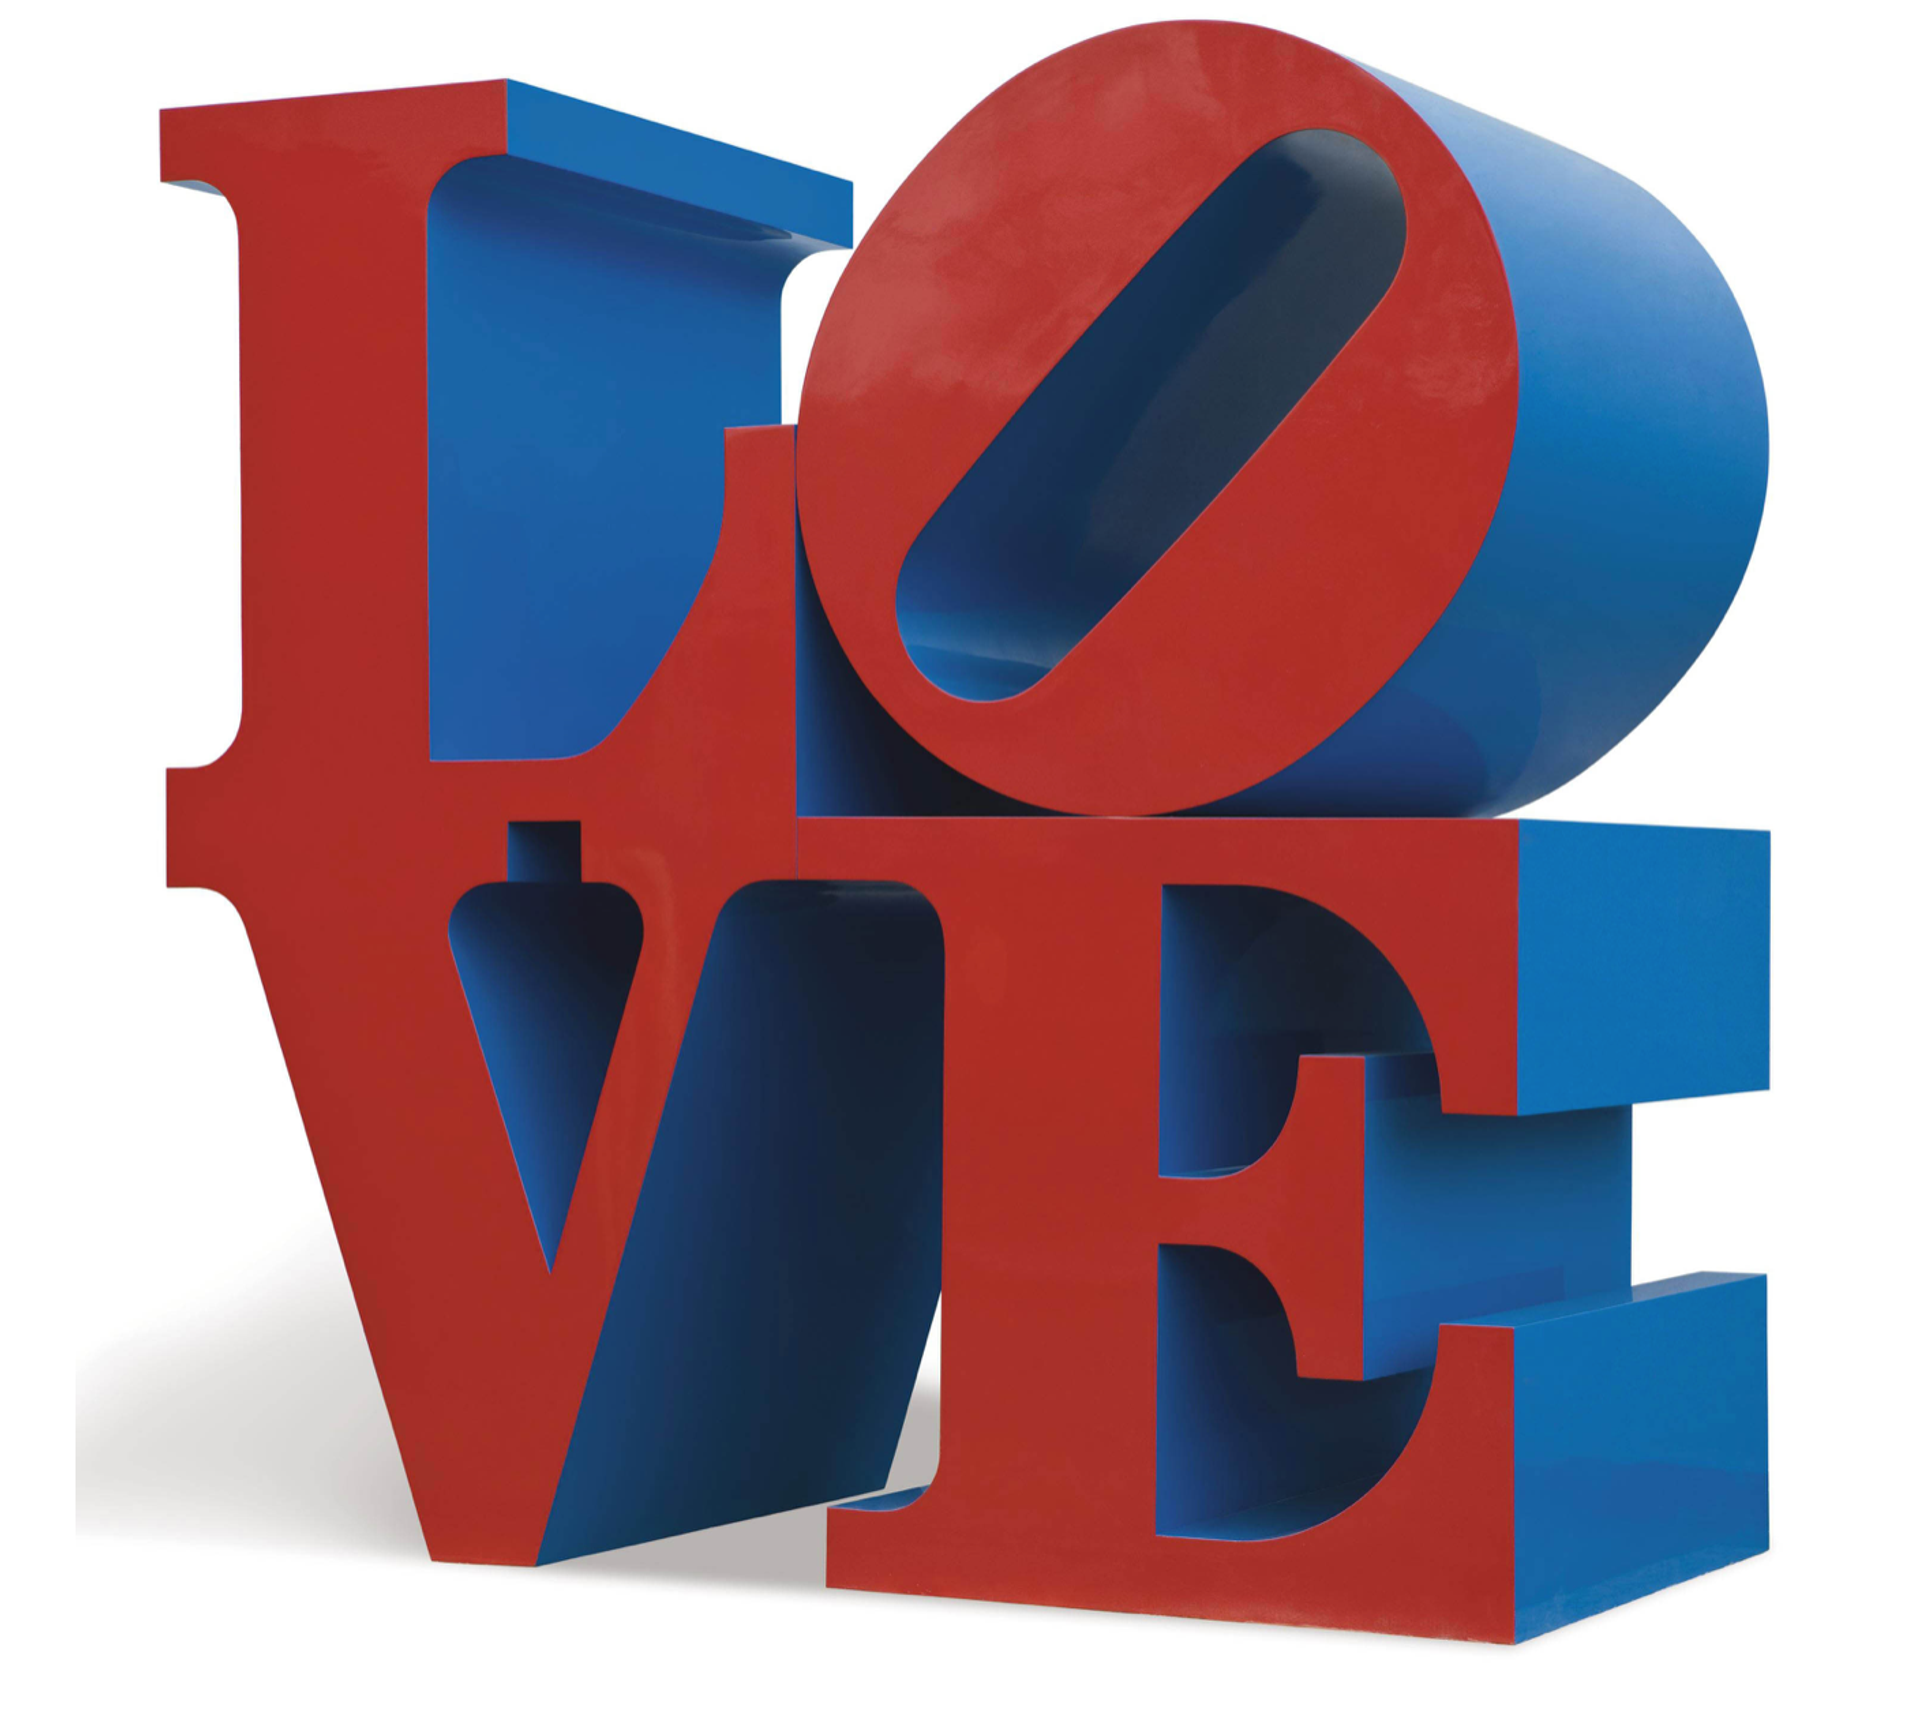 Love Red-Blue by Robert Indiana